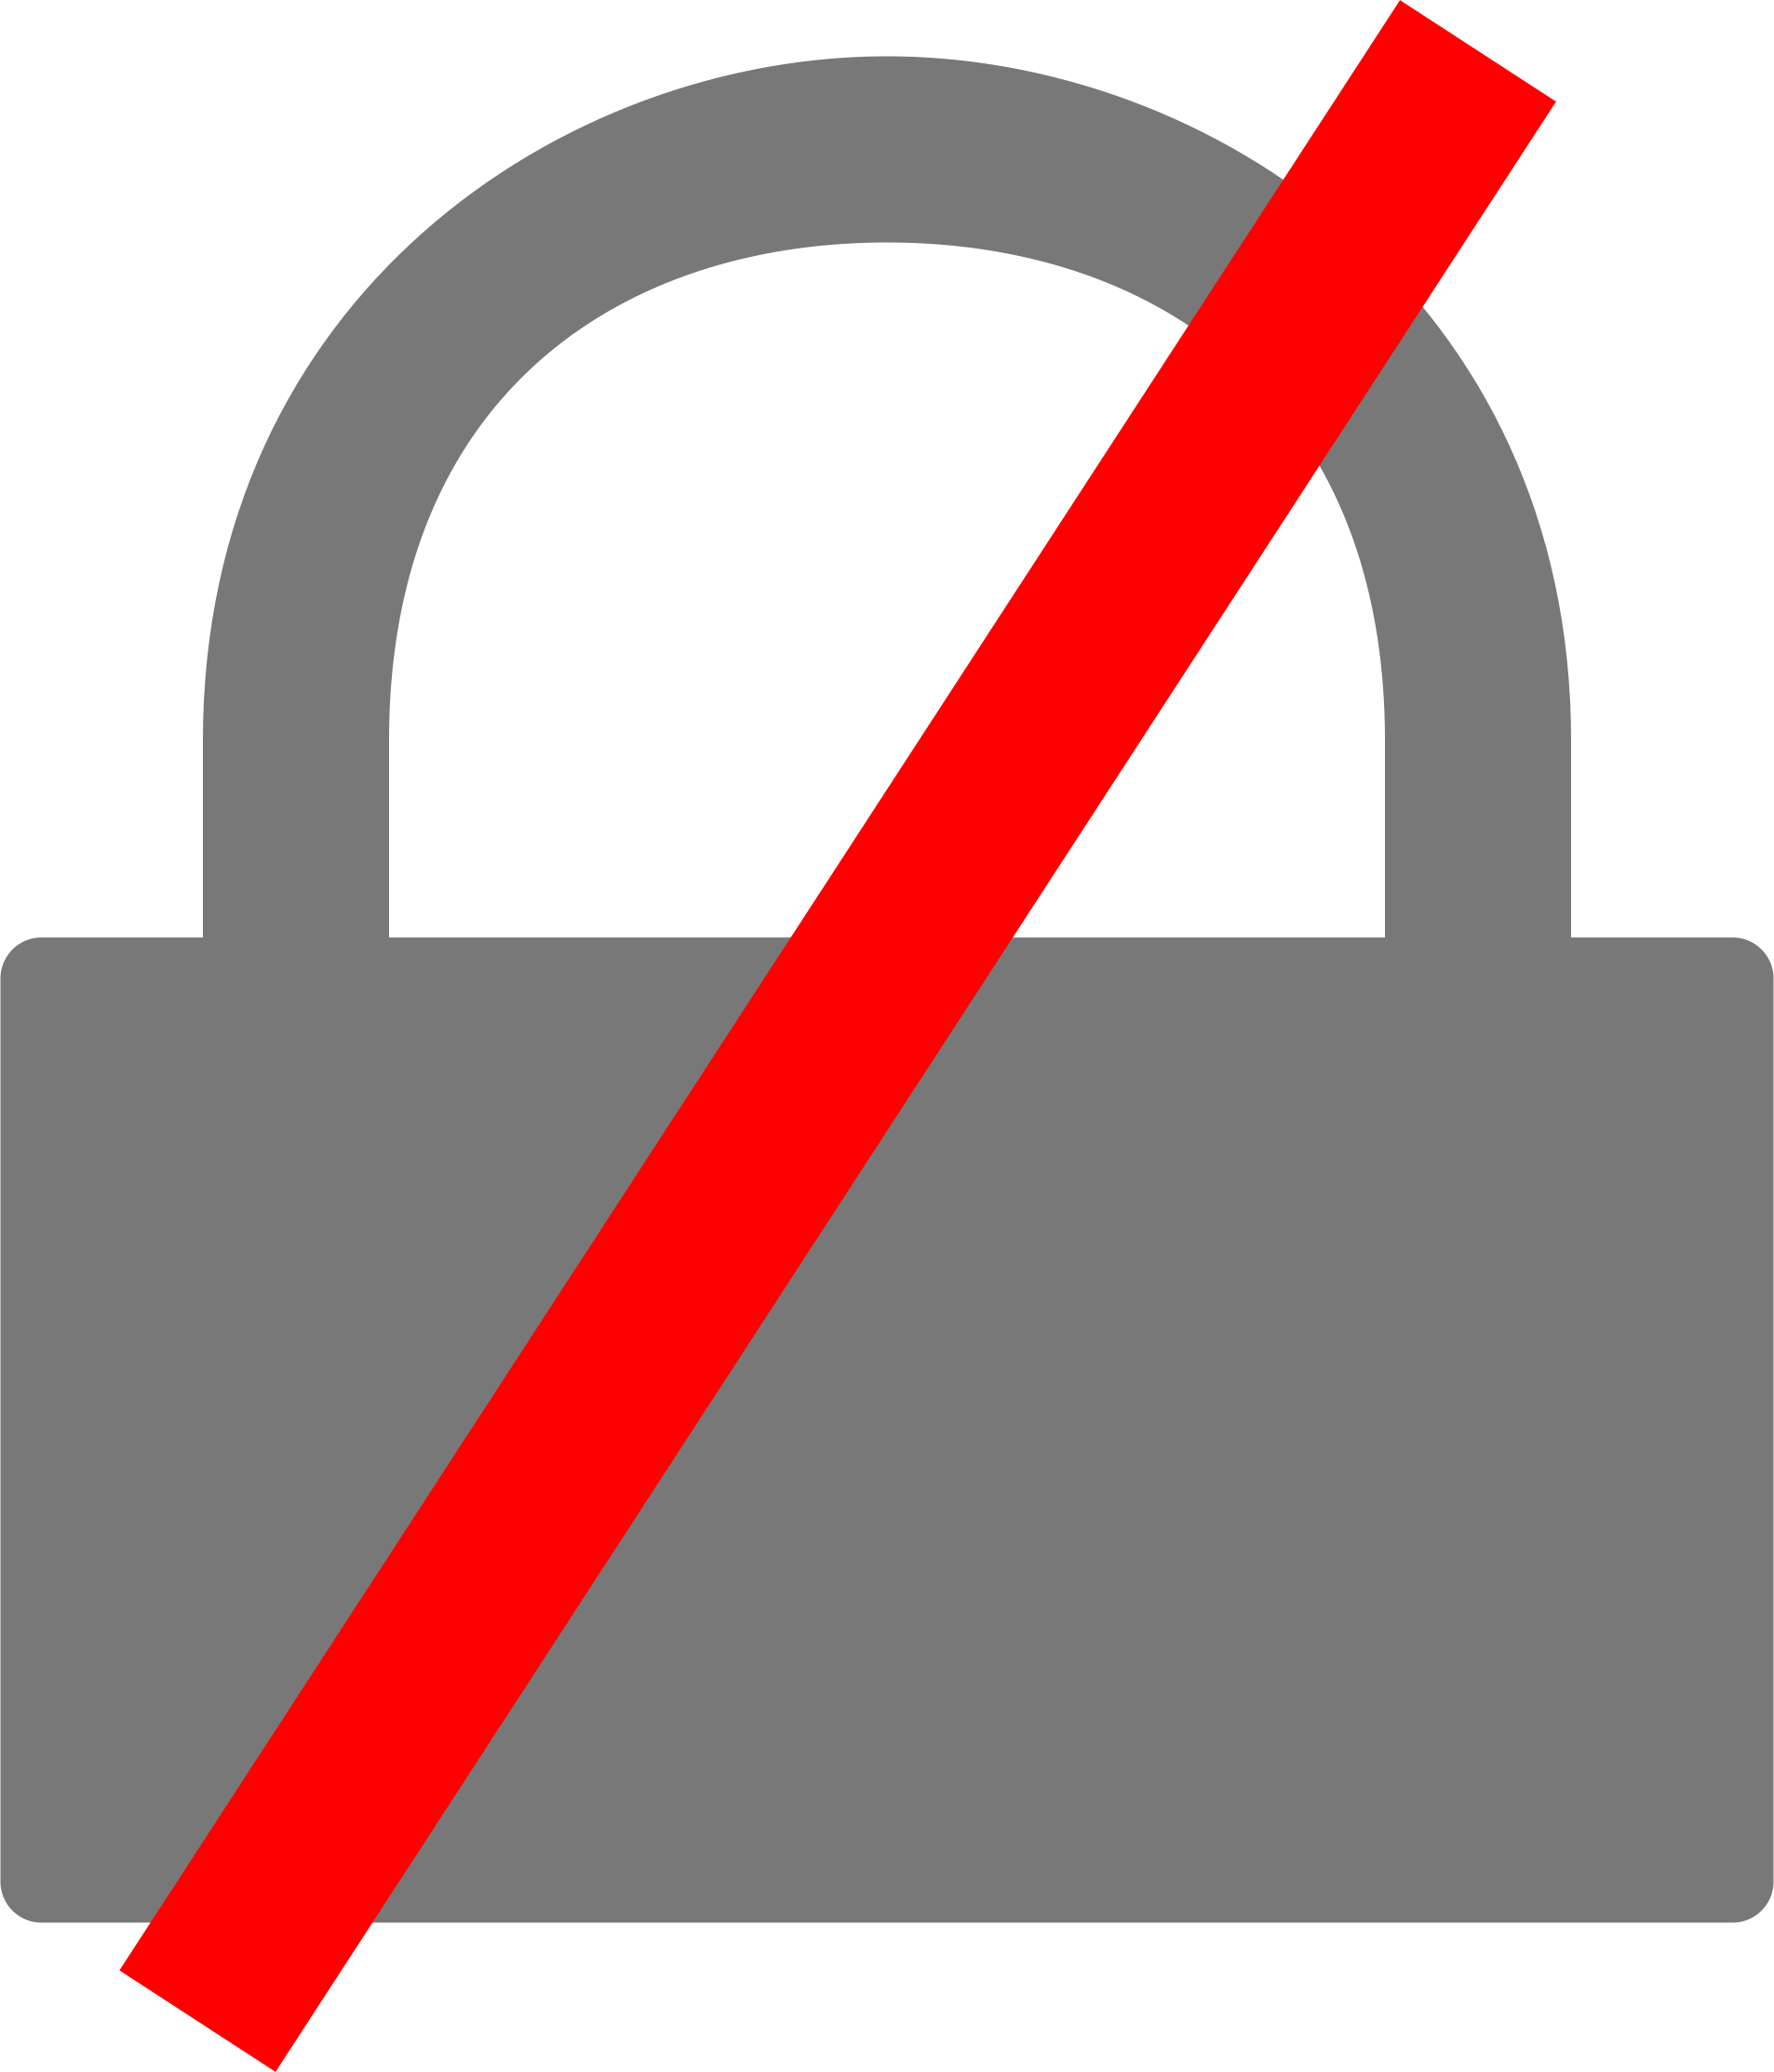 Insecure connection icon big. Lock clipart insecurity